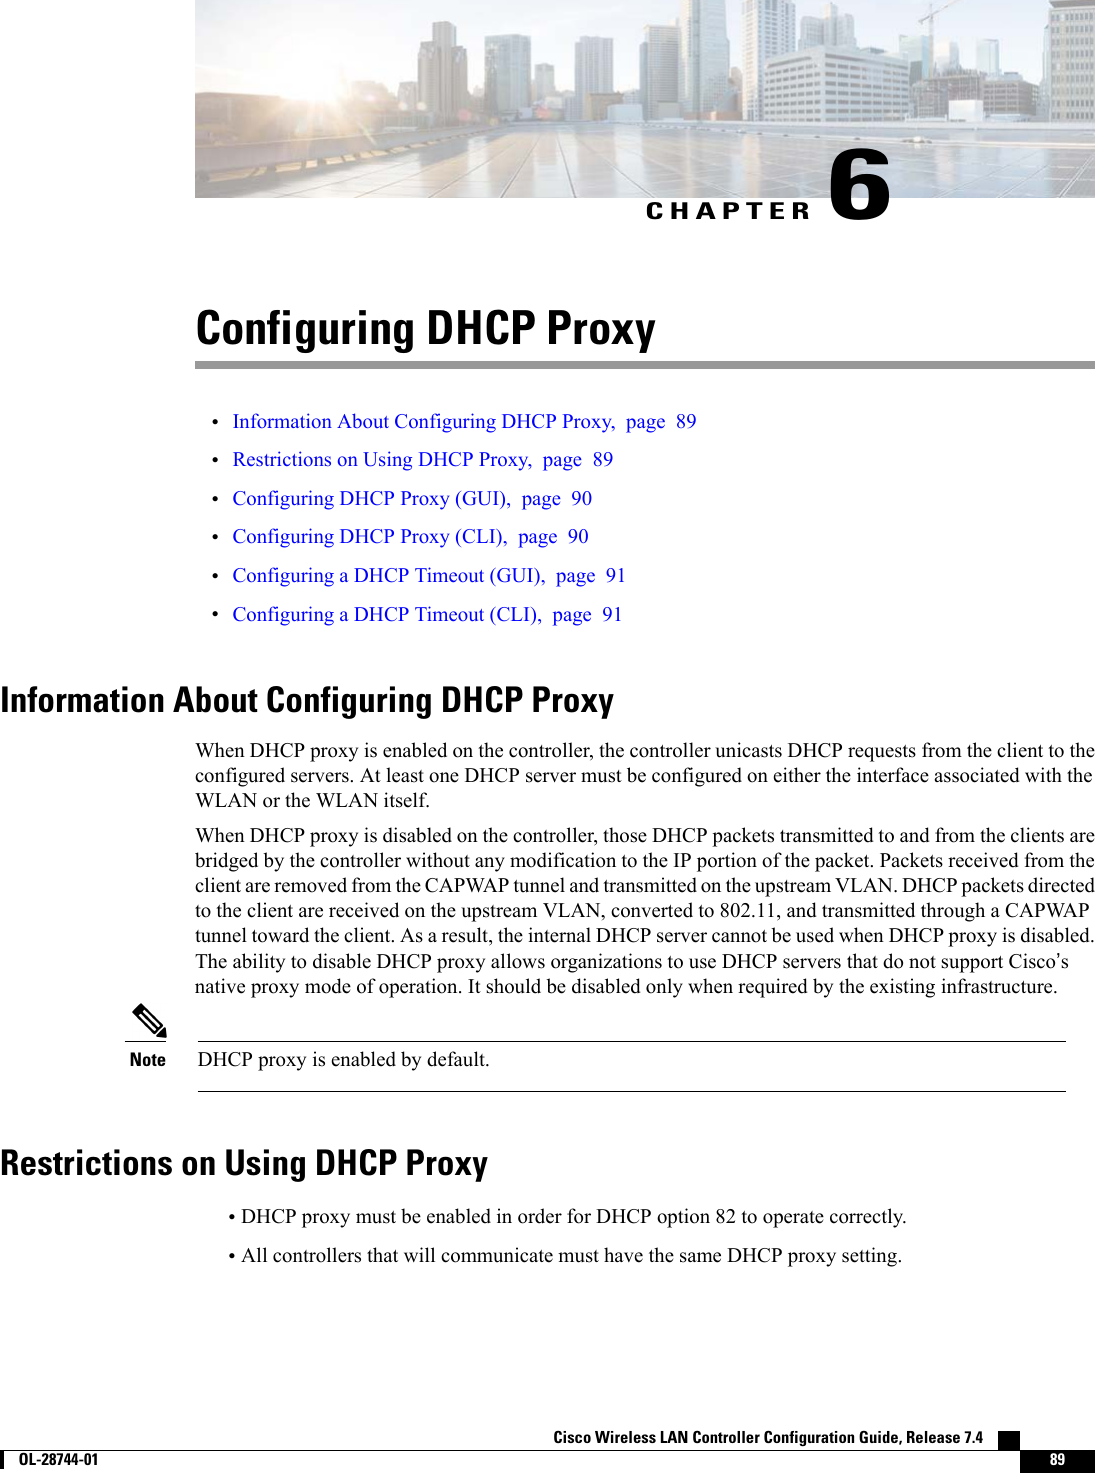 CHAPTER 6Configuring DHCP Proxy•Information About Configuring DHCP Proxy, page 89•Restrictions on Using DHCP Proxy, page 89•Configuring DHCP Proxy (GUI), page 90•Configuring DHCP Proxy (CLI), page 90•Configuring a DHCP Timeout (GUI), page 91•Configuring a DHCP Timeout (CLI), page 91Information About Configuring DHCP ProxyWhen DHCP proxy is enabled on the controller, the controller unicasts DHCP requests from the client to theconfigured servers. At least one DHCP server must be configured on either the interface associated with theWLAN or the WLAN itself.When DHCP proxy is disabled on the controller, those DHCP packets transmitted to and from the clients arebridged by the controller without any modification to the IP portion of the packet. Packets received from theclient are removed from the CAPWAP tunnel and transmitted on the upstream VLAN. DHCP packets directedto the client are received on the upstream VLAN, converted to 802.11, and transmitted through a CAPWAPtunnel toward the client. As a result, the internal DHCP server cannot be used when DHCP proxy is disabled.The ability to disable DHCP proxy allows organizations to use DHCP servers that do not support Cisco’snative proxy mode of operation. It should be disabled only when required by the existing infrastructure.DHCP proxy is enabled by default.NoteRestrictions on Using DHCP Proxy•DHCP proxy must be enabled in order for DHCP option 82 to operate correctly.•All controllers that will communicate must have the same DHCP proxy setting.Cisco Wireless LAN Controller Configuration Guide, Release 7.4        OL-28744-01 89